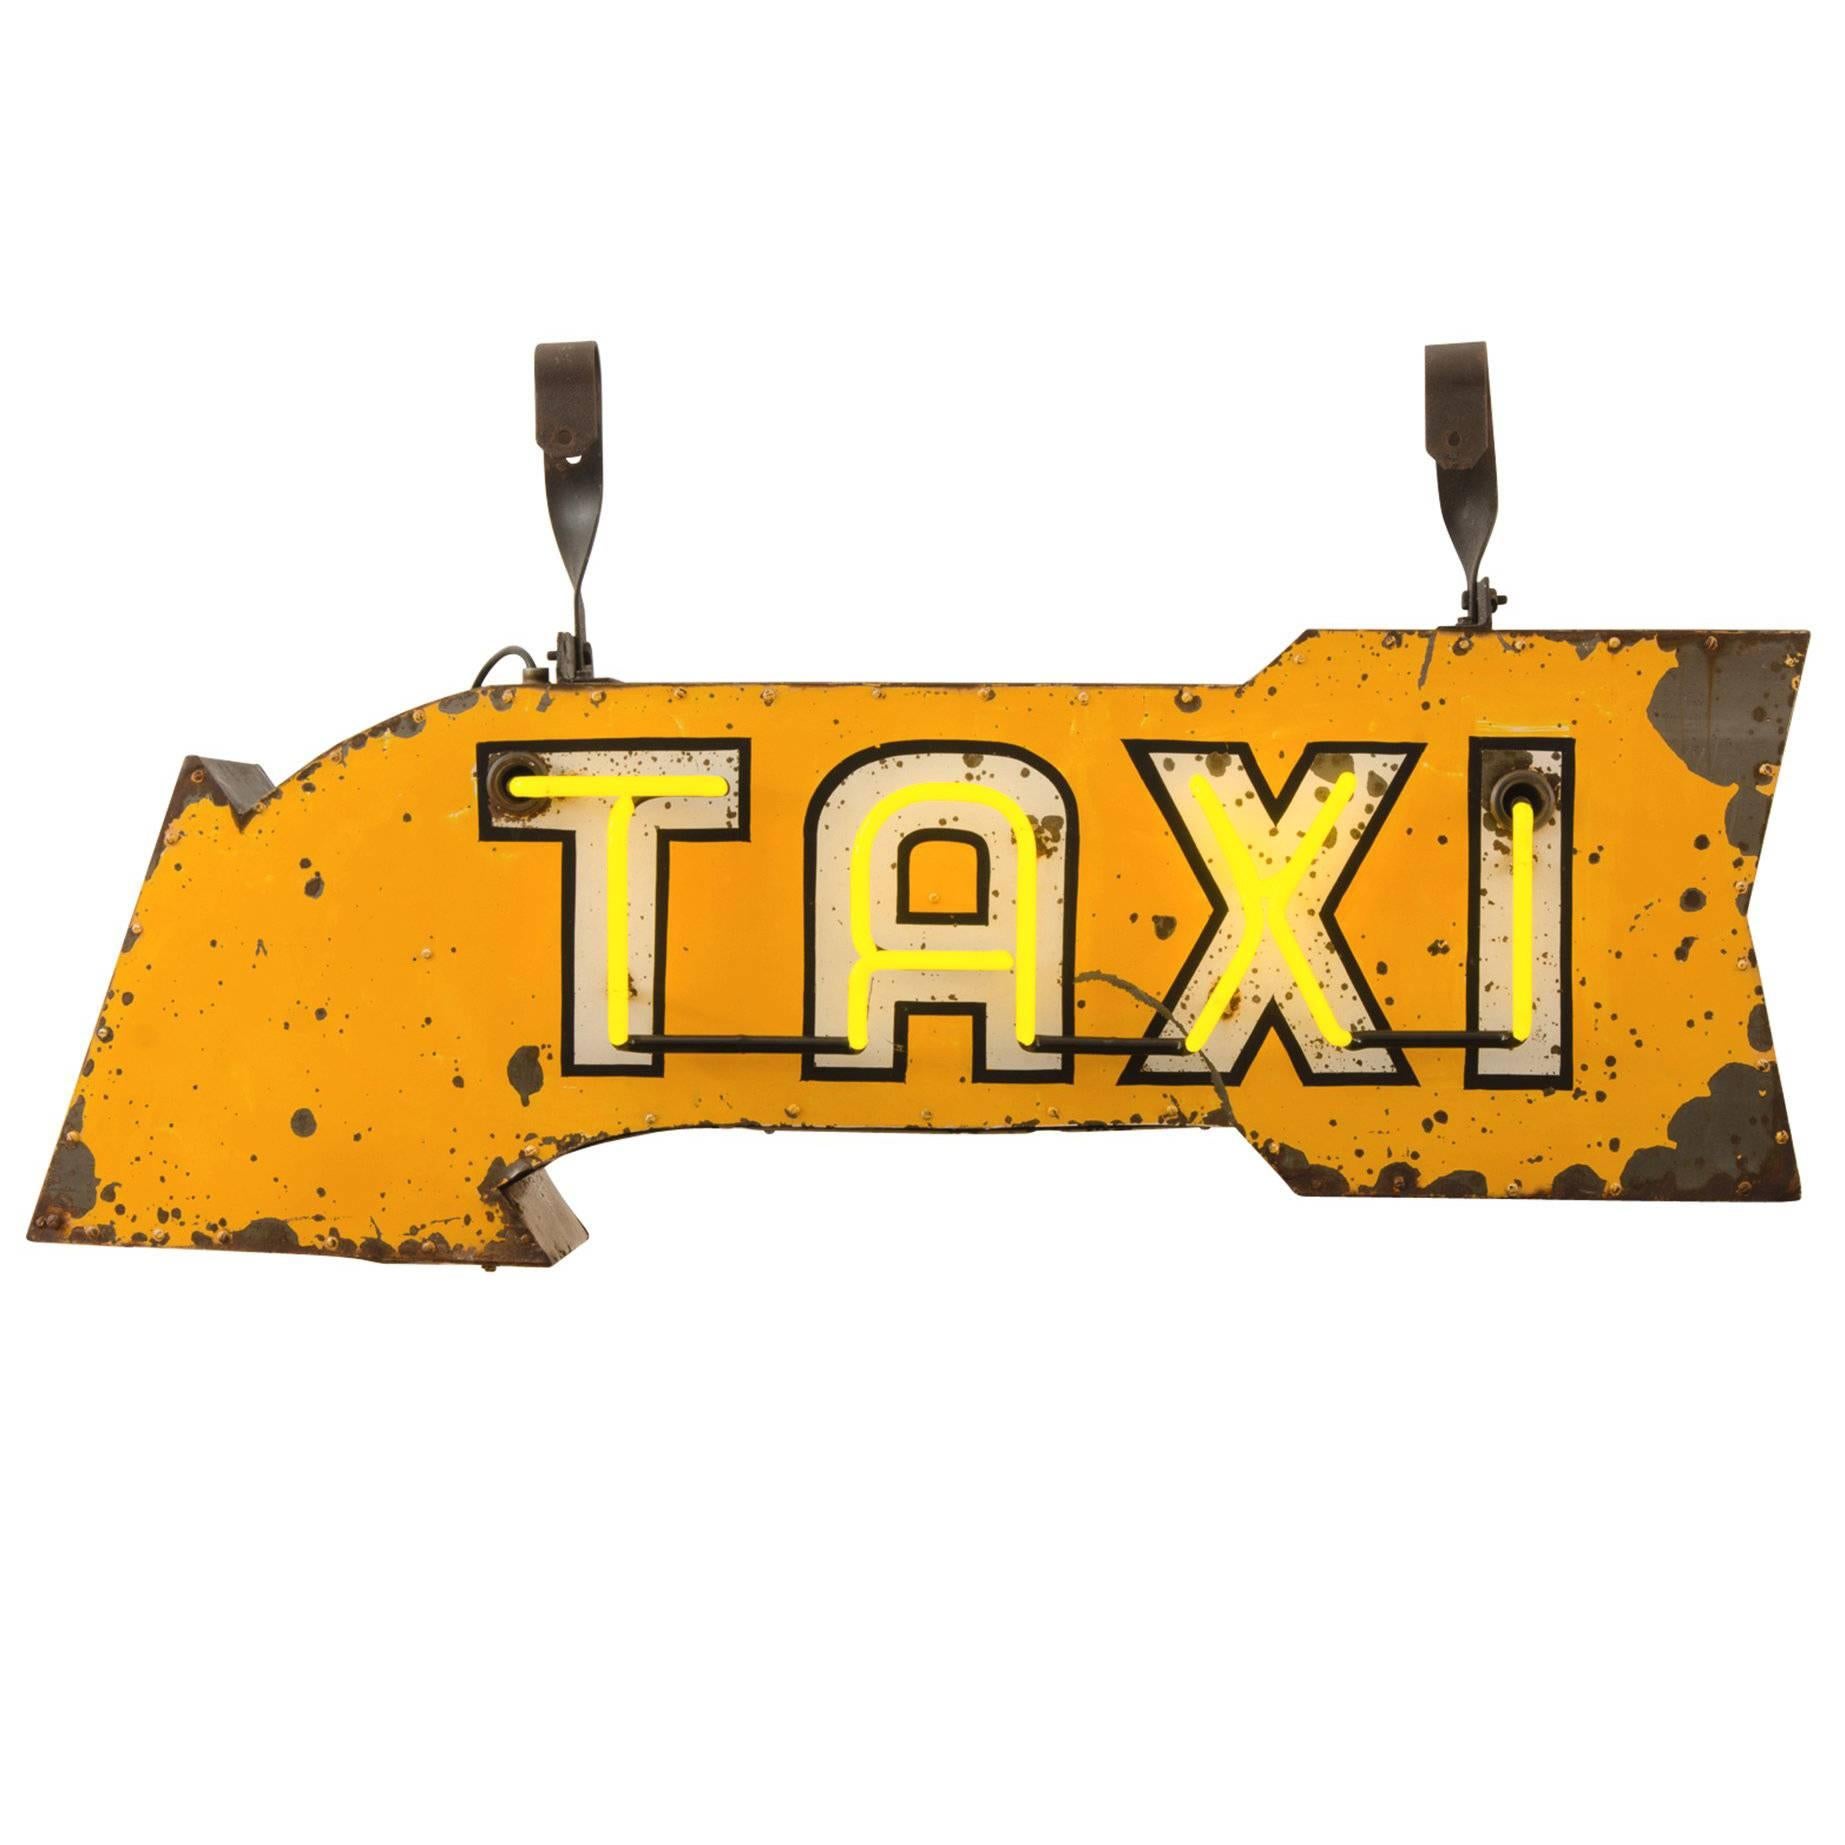 Bright Yellow Double-Sided Neon Taxi Sign, circa 1950s